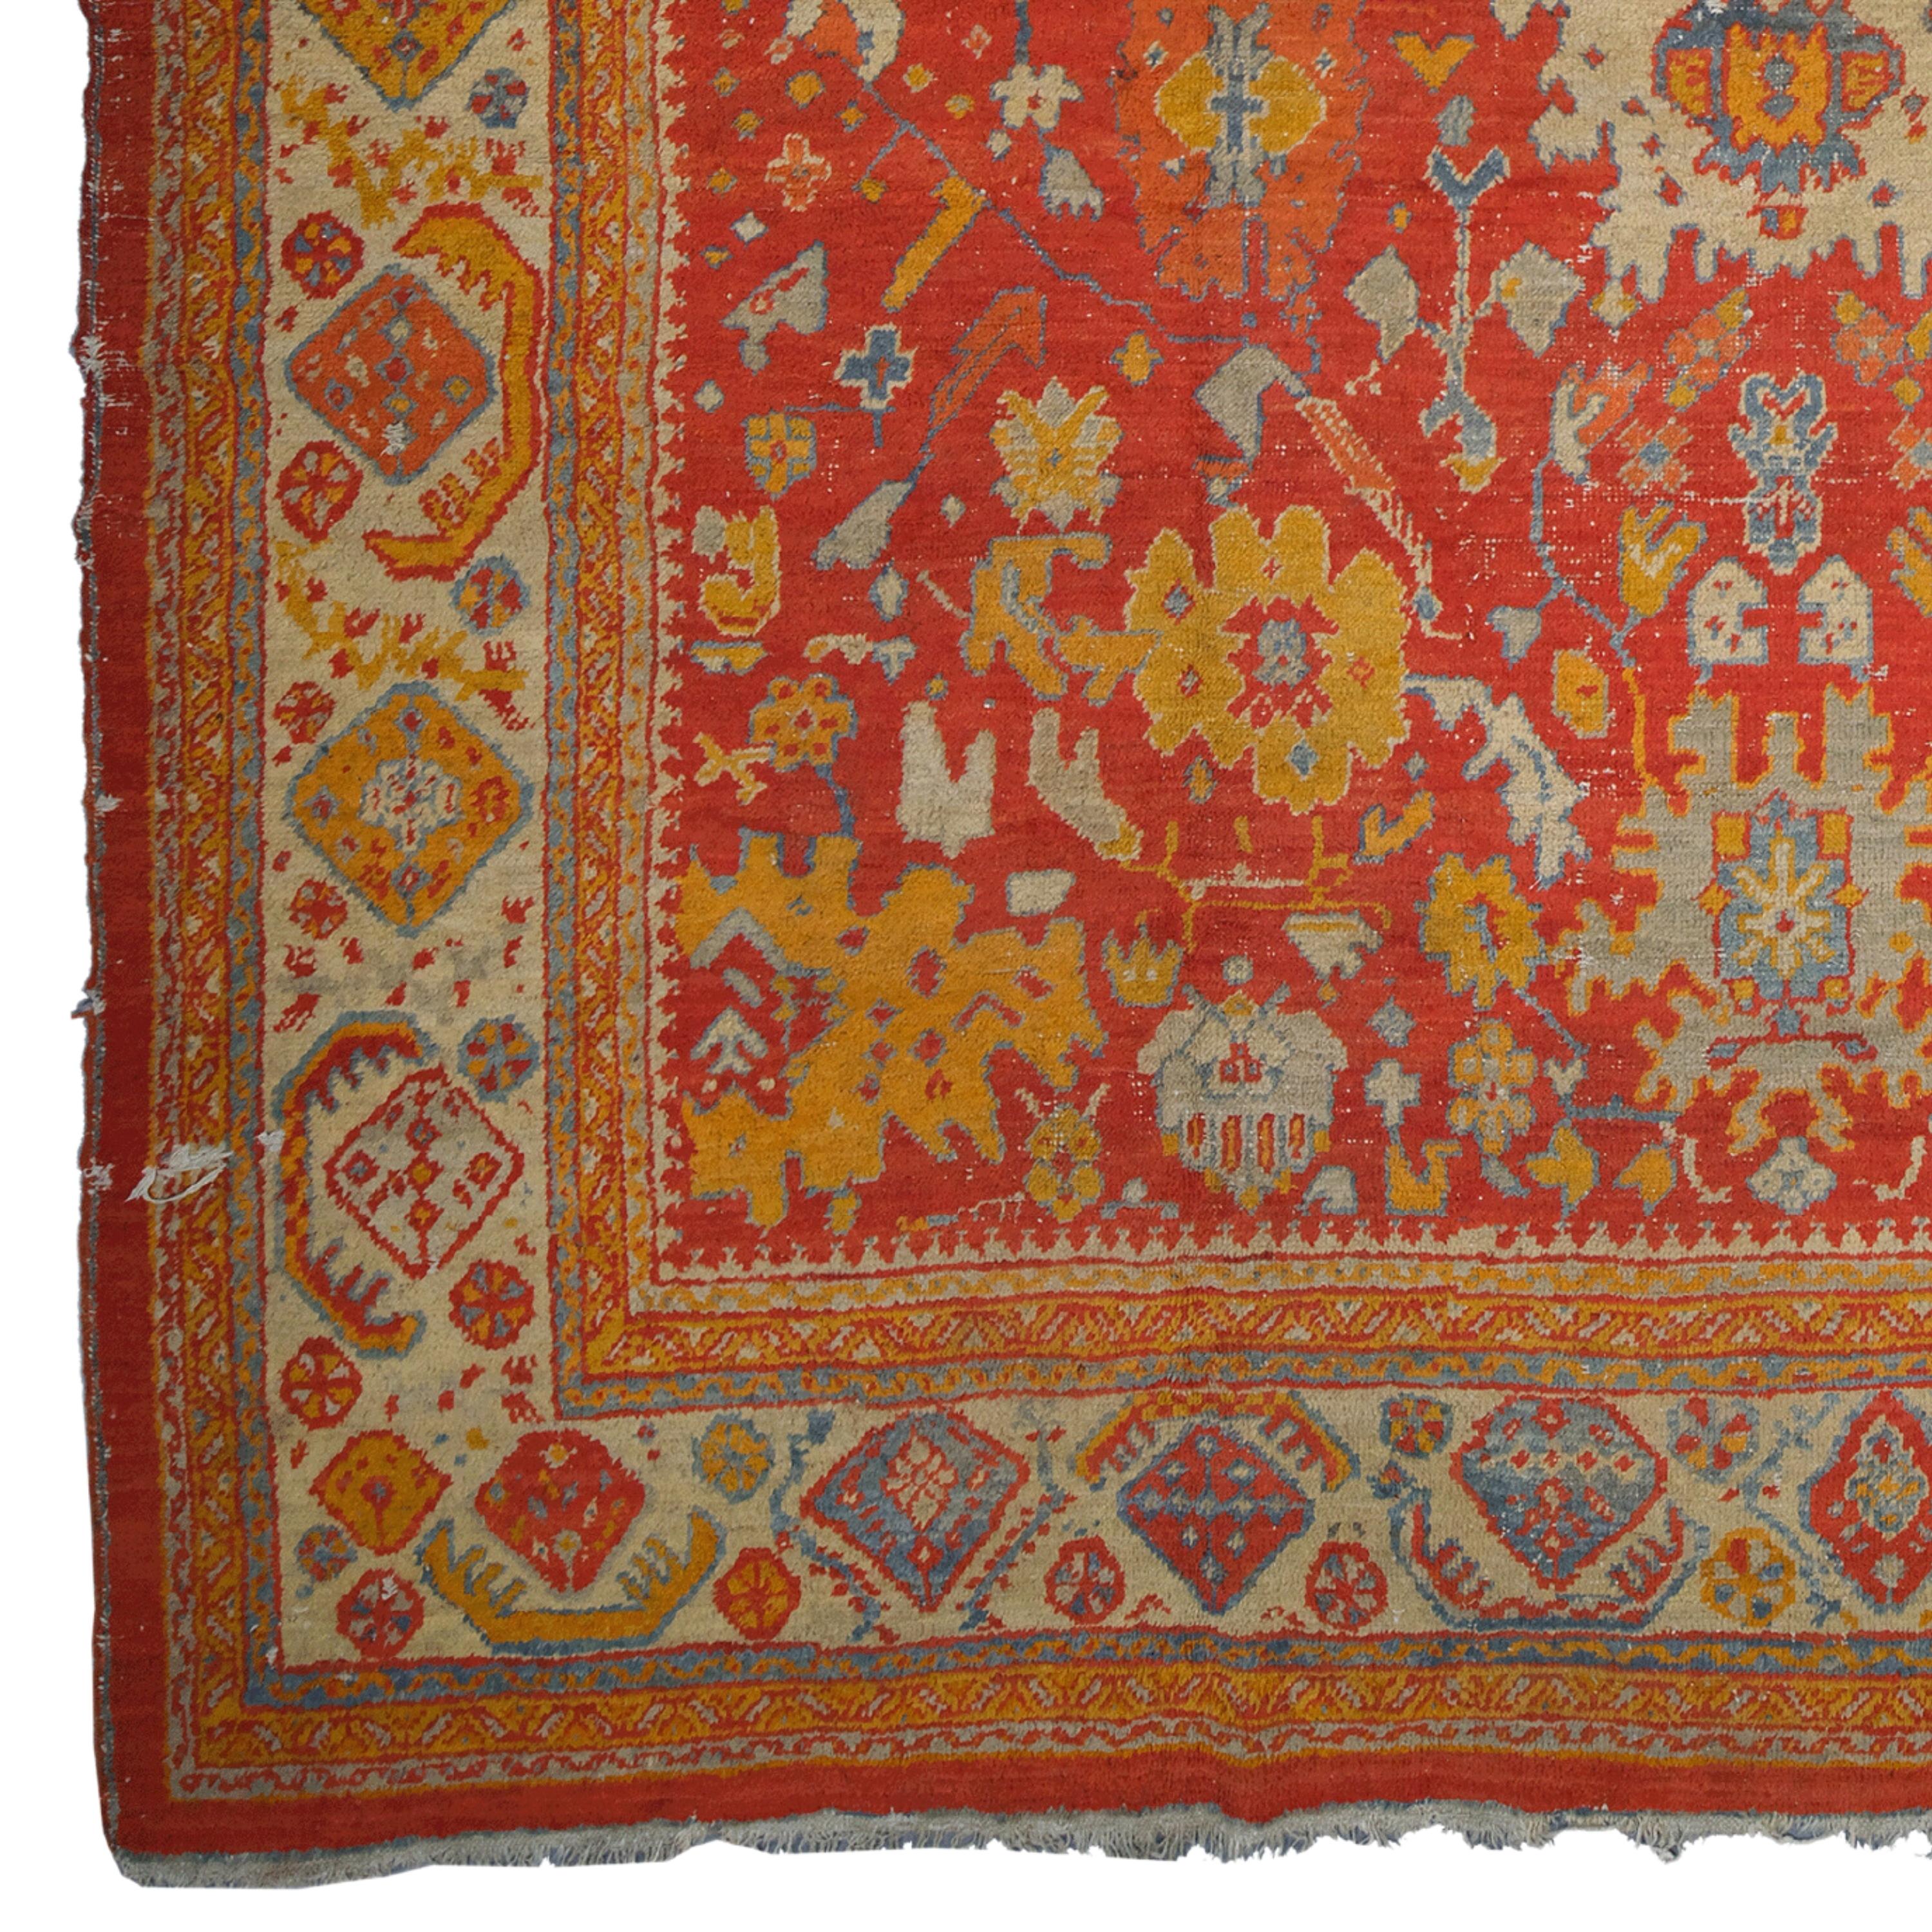 Ottoman Elegance: Antique Ghordes Carpet from the End of the 19th Century

If you want to add historical and artistic value to your home, this antique carpet is for you. This carpet is a Ghordes carpet woven in the Ghordes region at the end of the